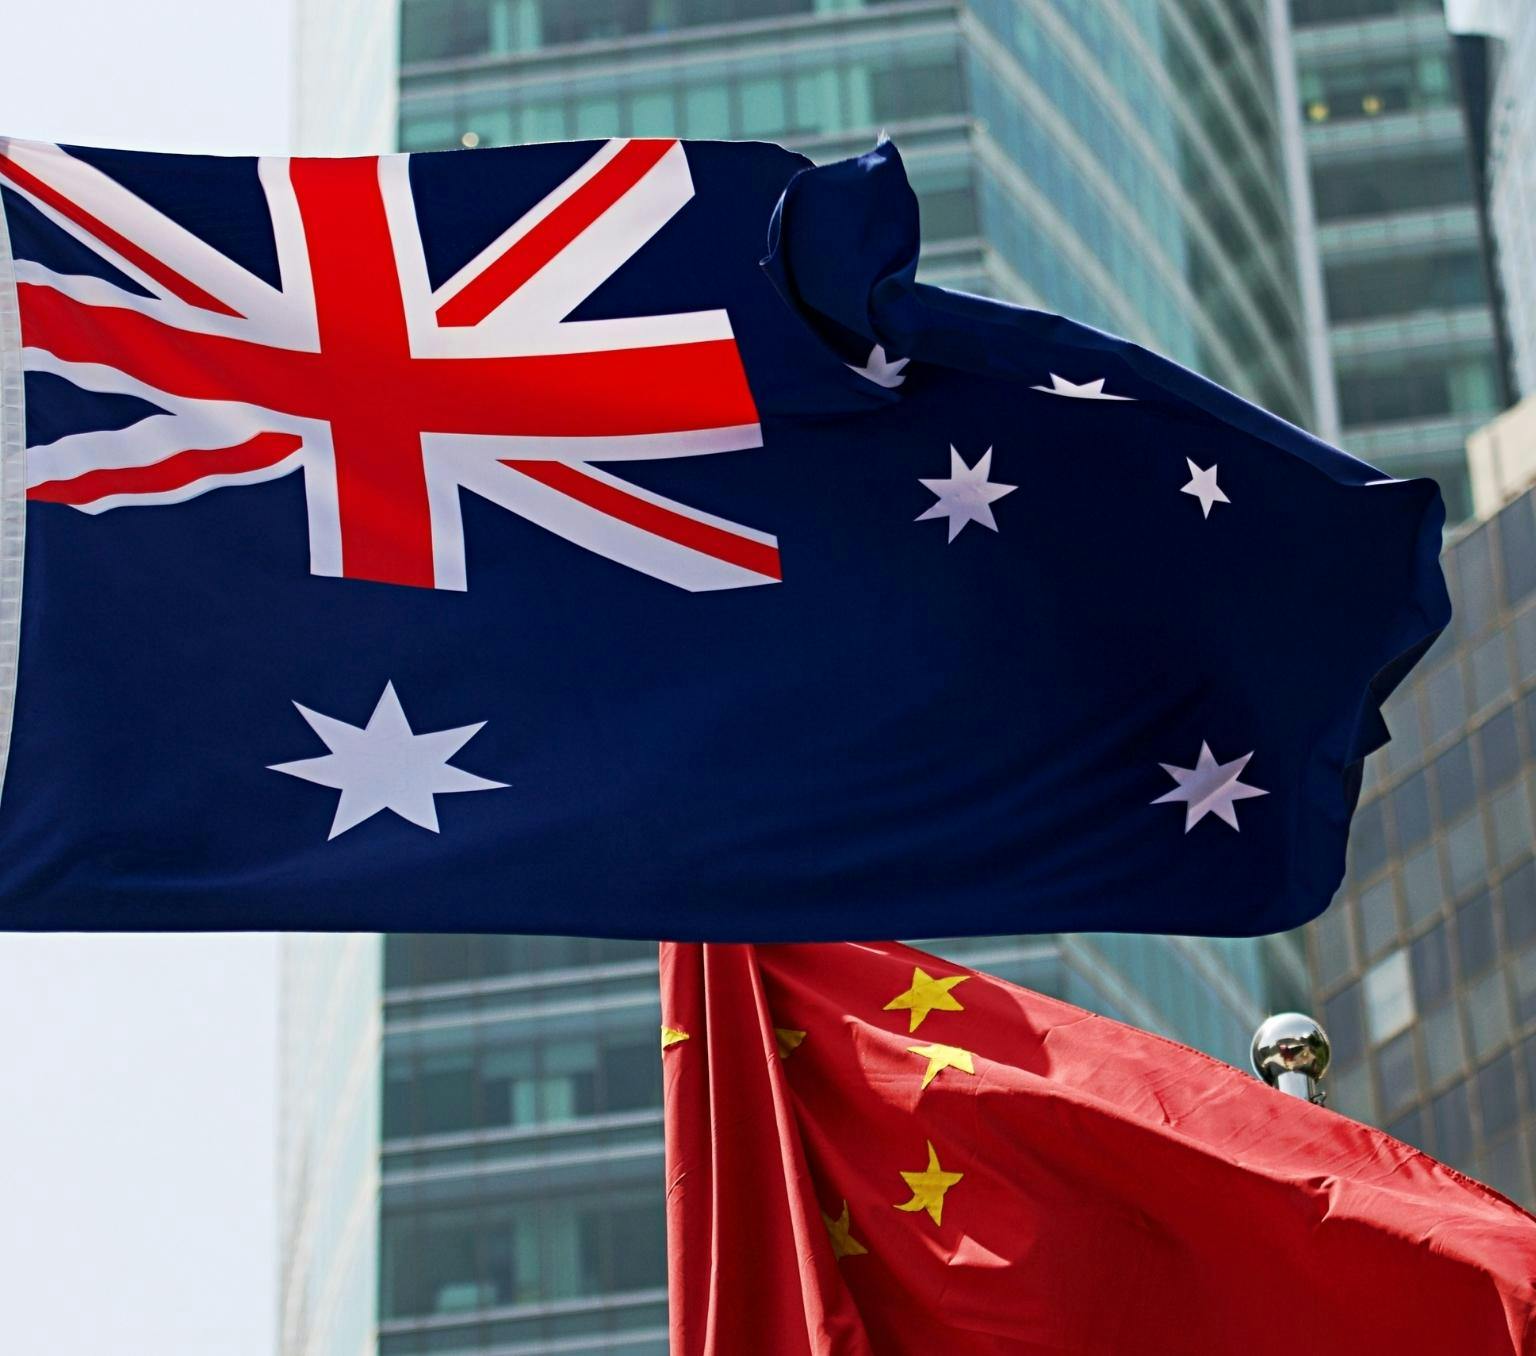 The Australian and Chinese flags fly in front of a tall building.